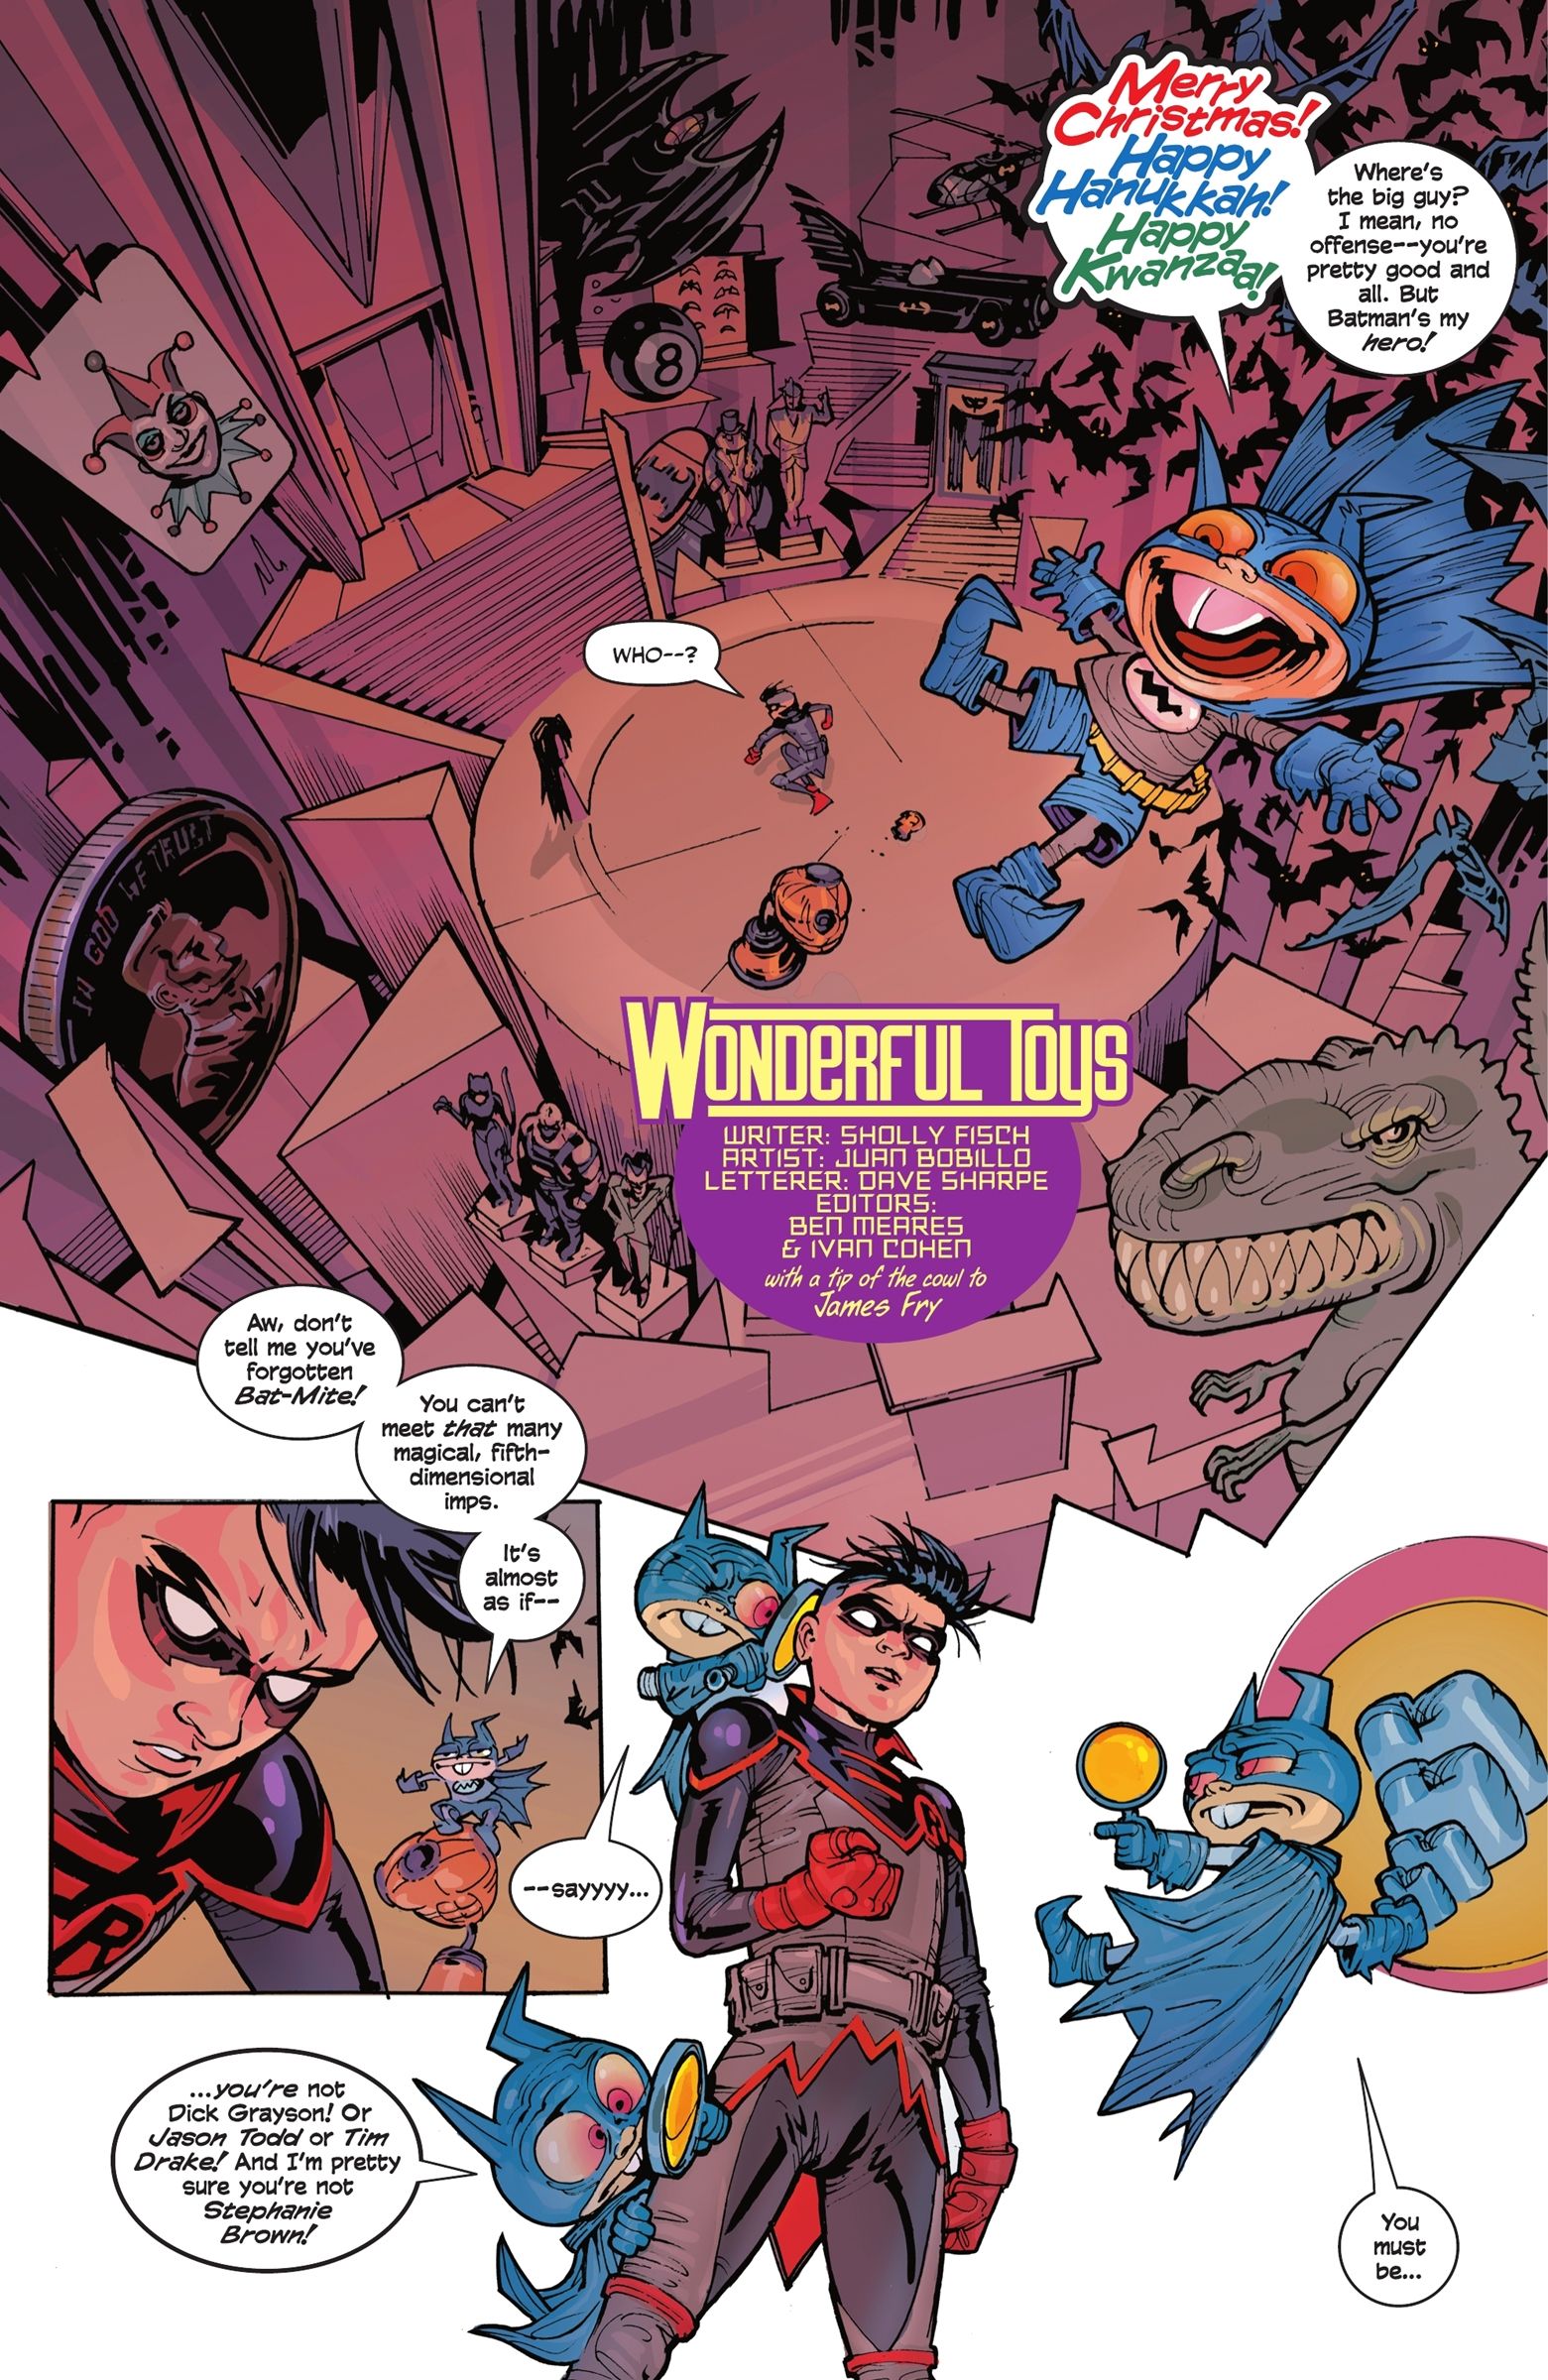 DC's 'Twas the 'Mite Before Christmas Bat-Mite and Damian Wayne AKA Robin in Batcave